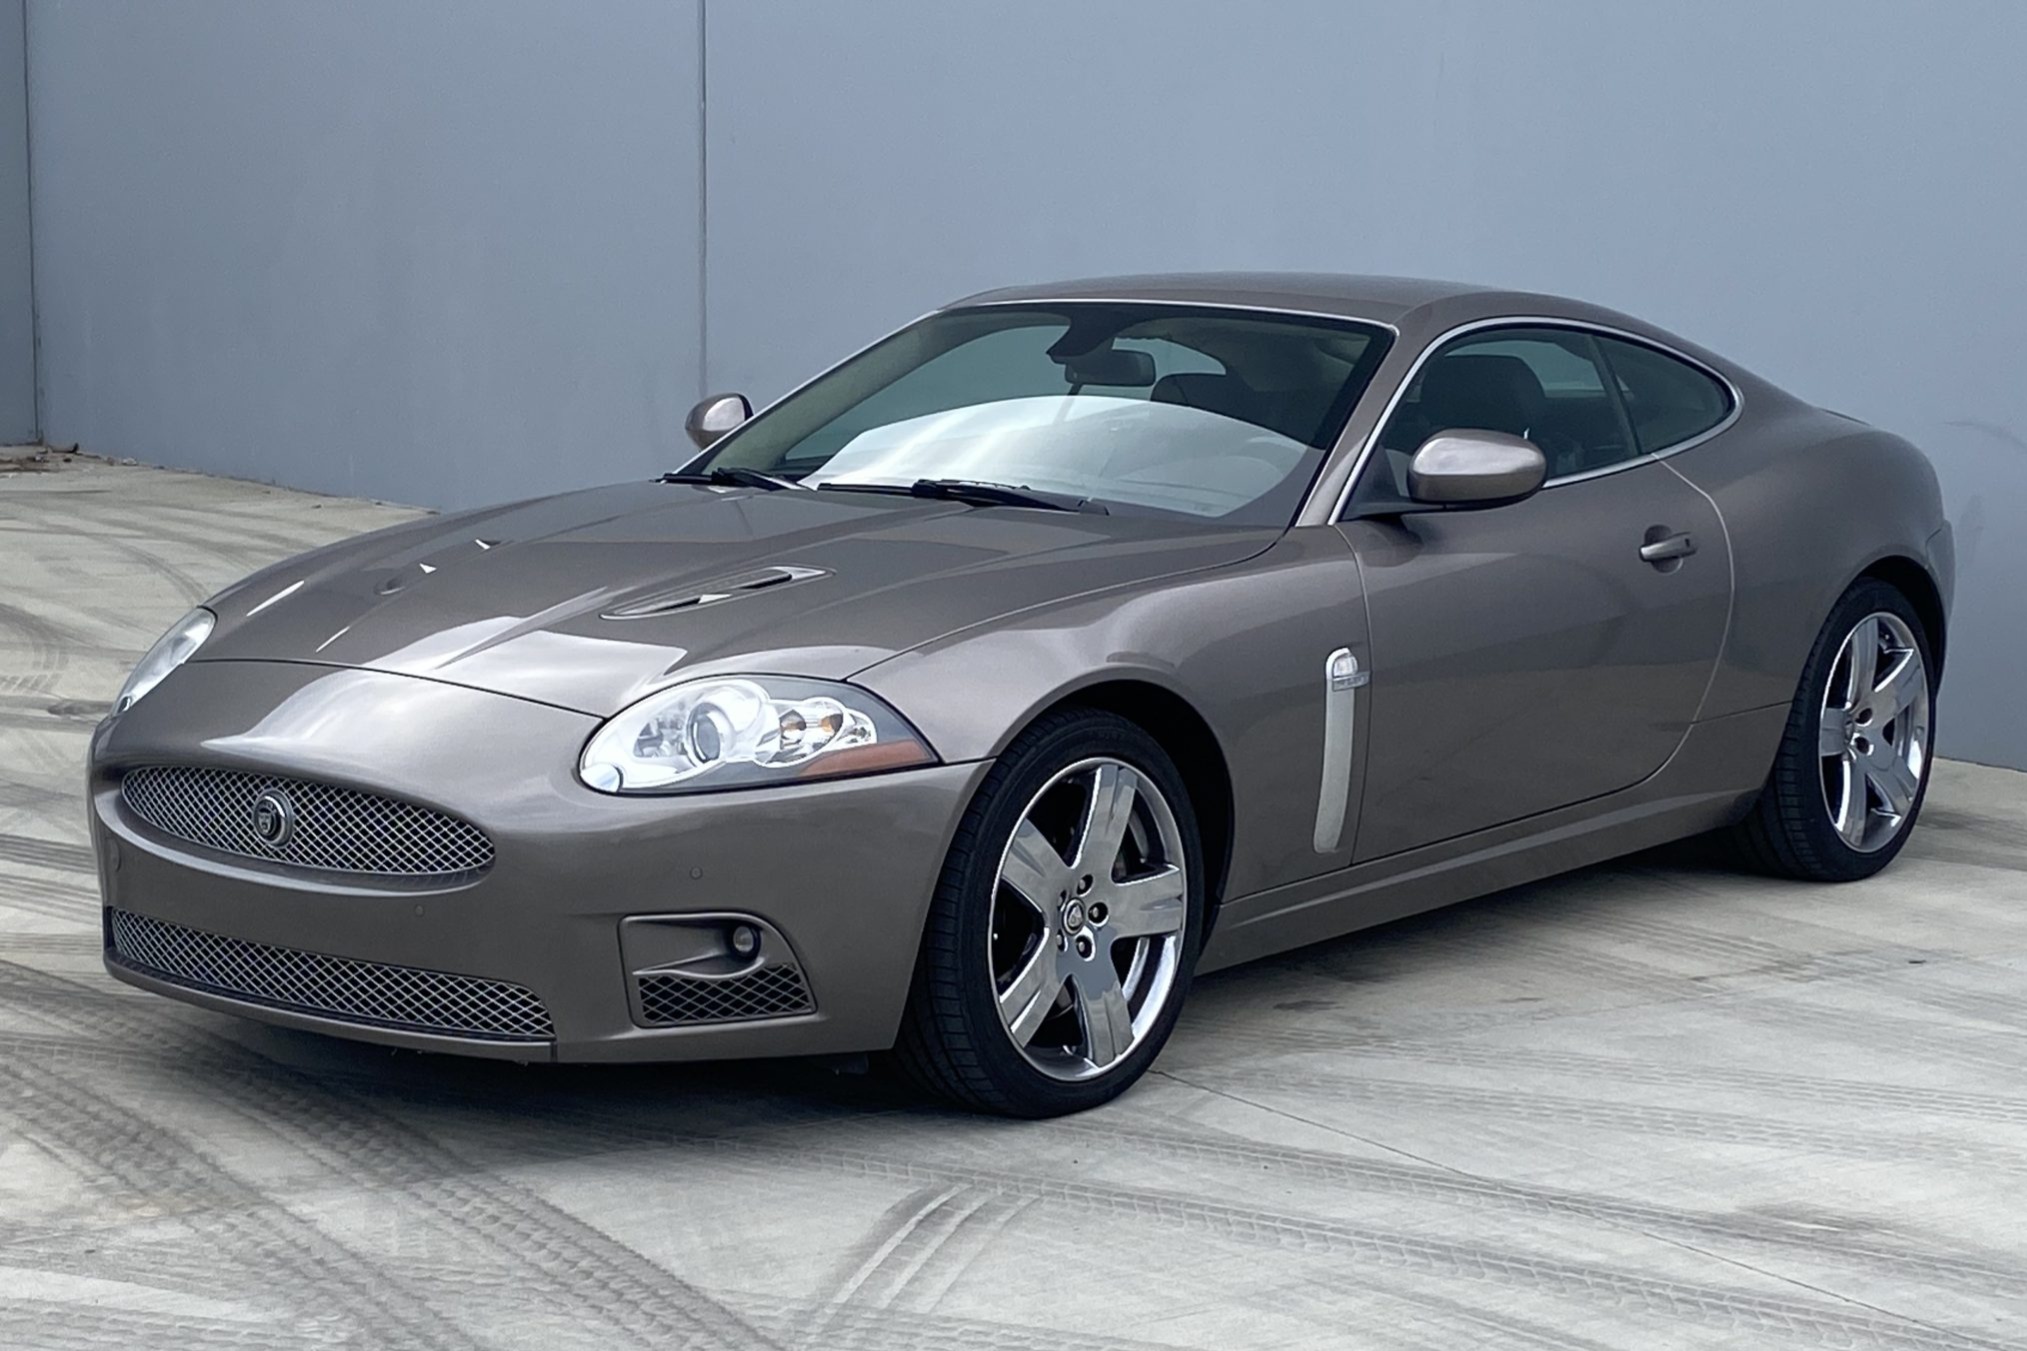 Used 31k-Mile 2009 Jaguar XKR Coupe Review